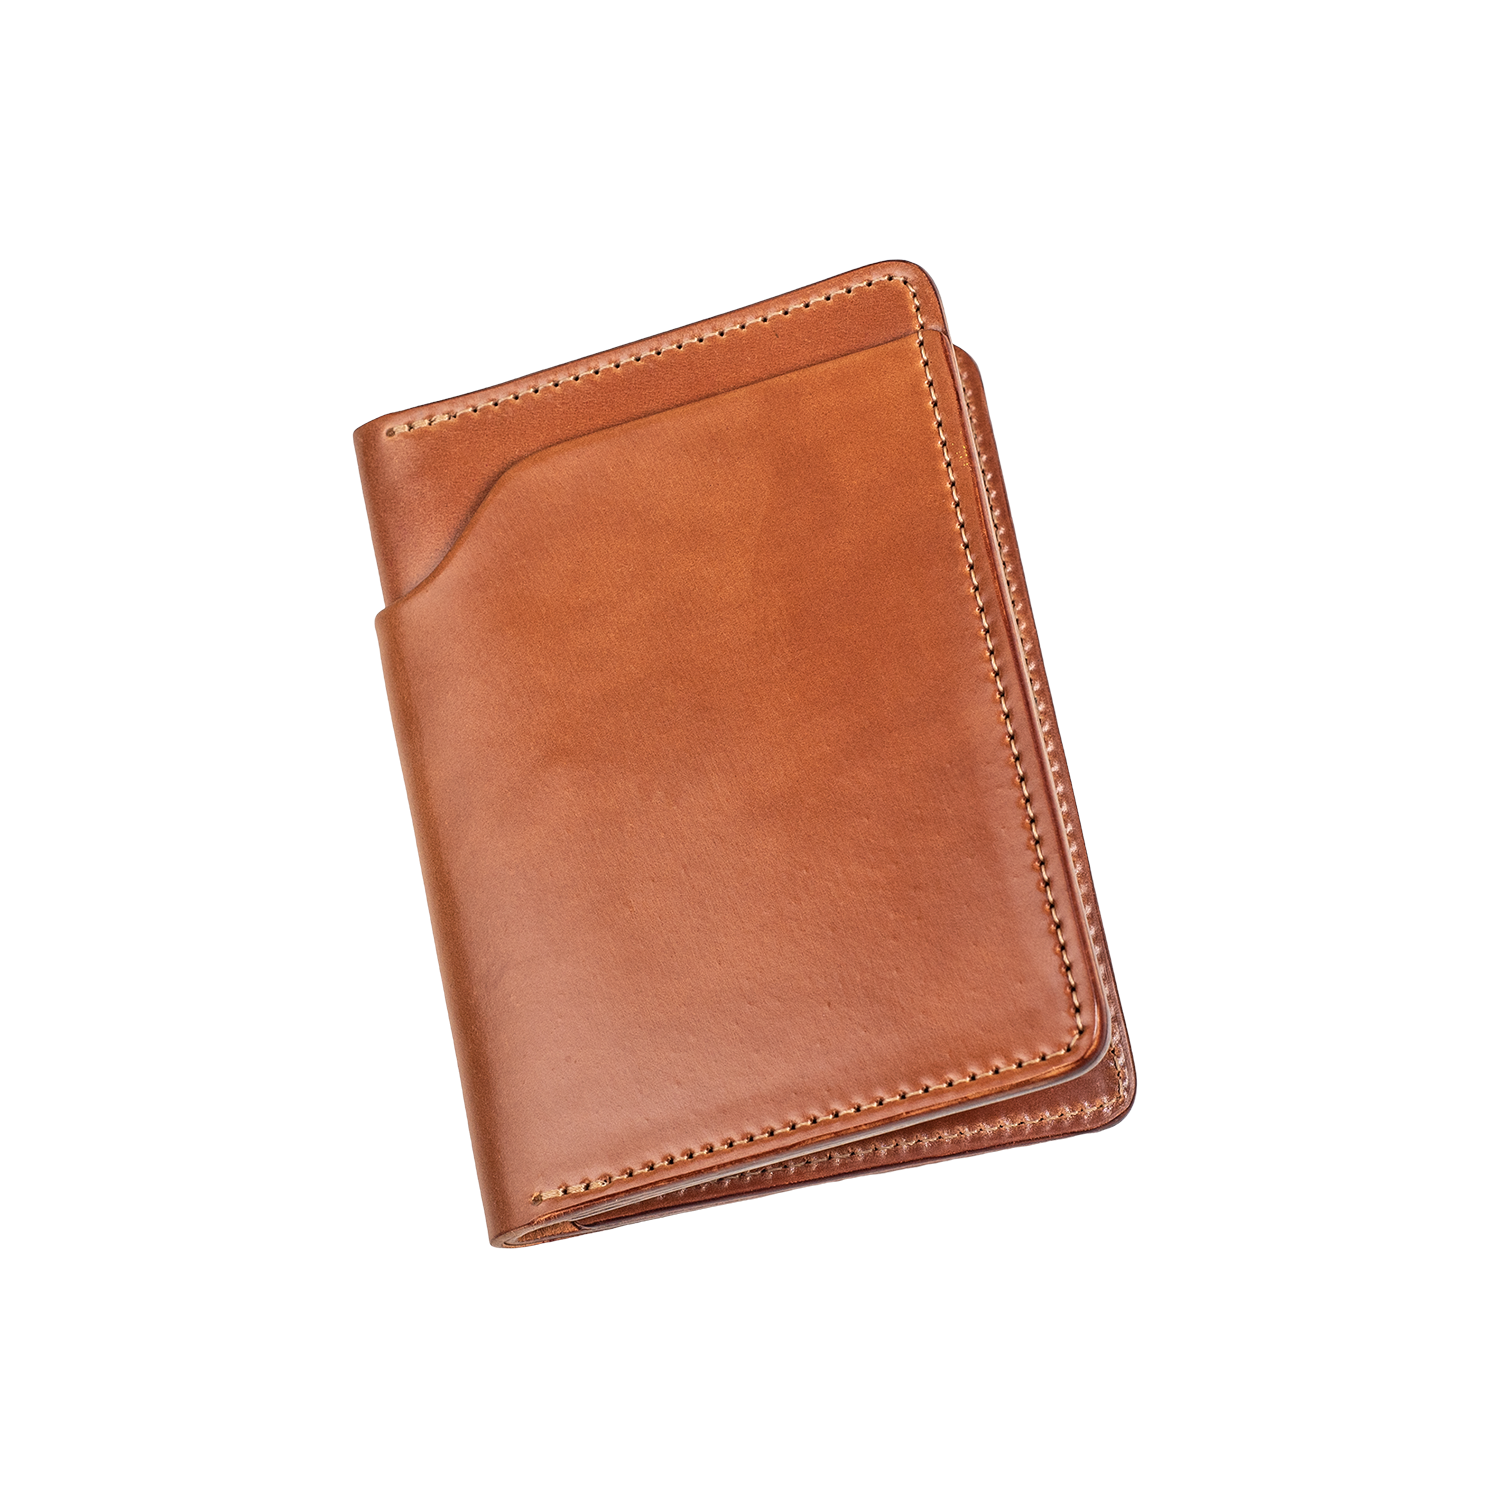 Magnum Wallet in Black Leather with red stitching.